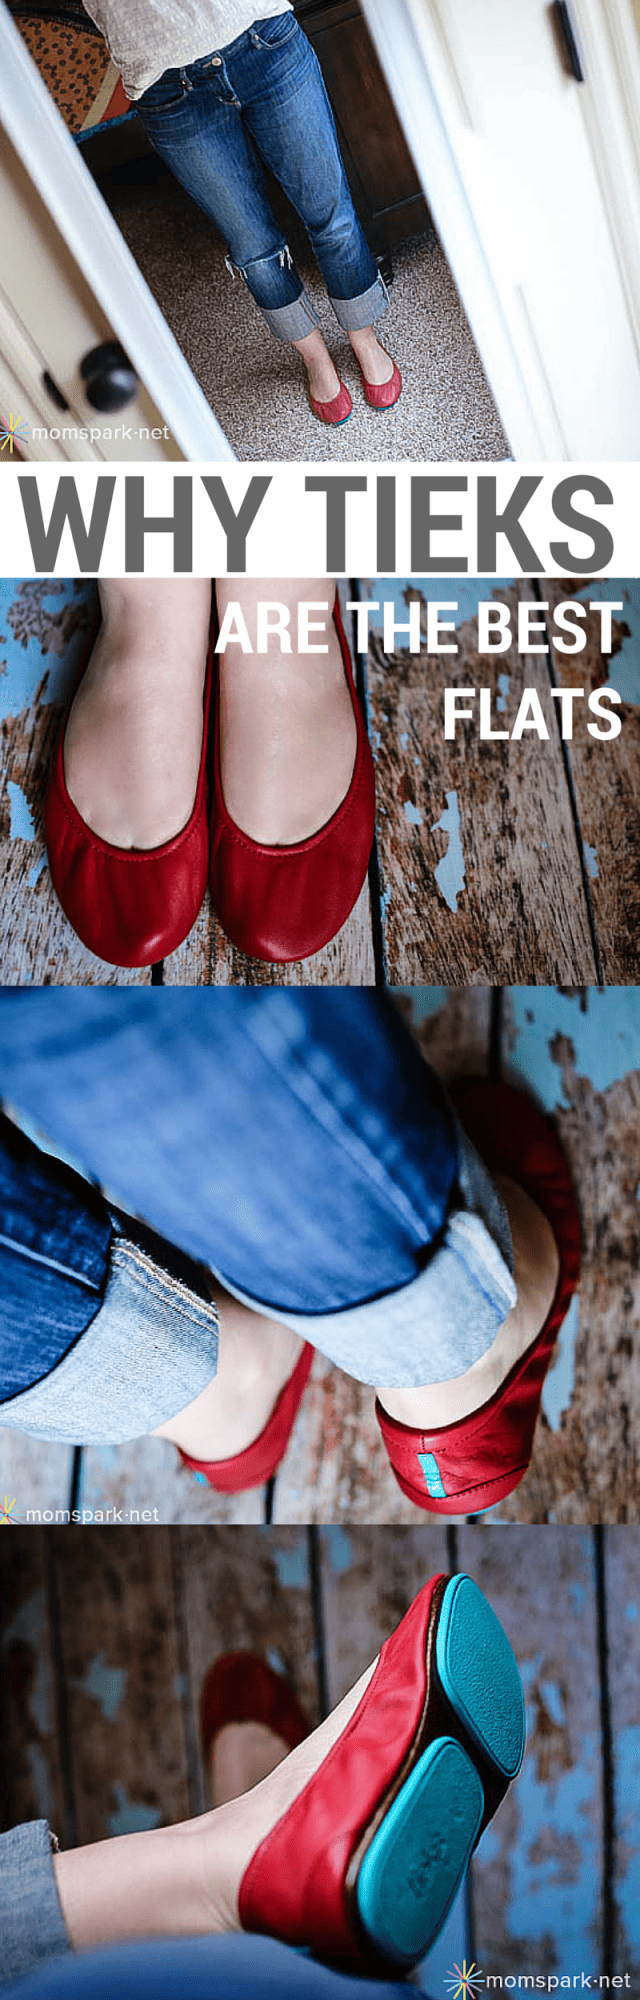 Why Tieks are the best flats